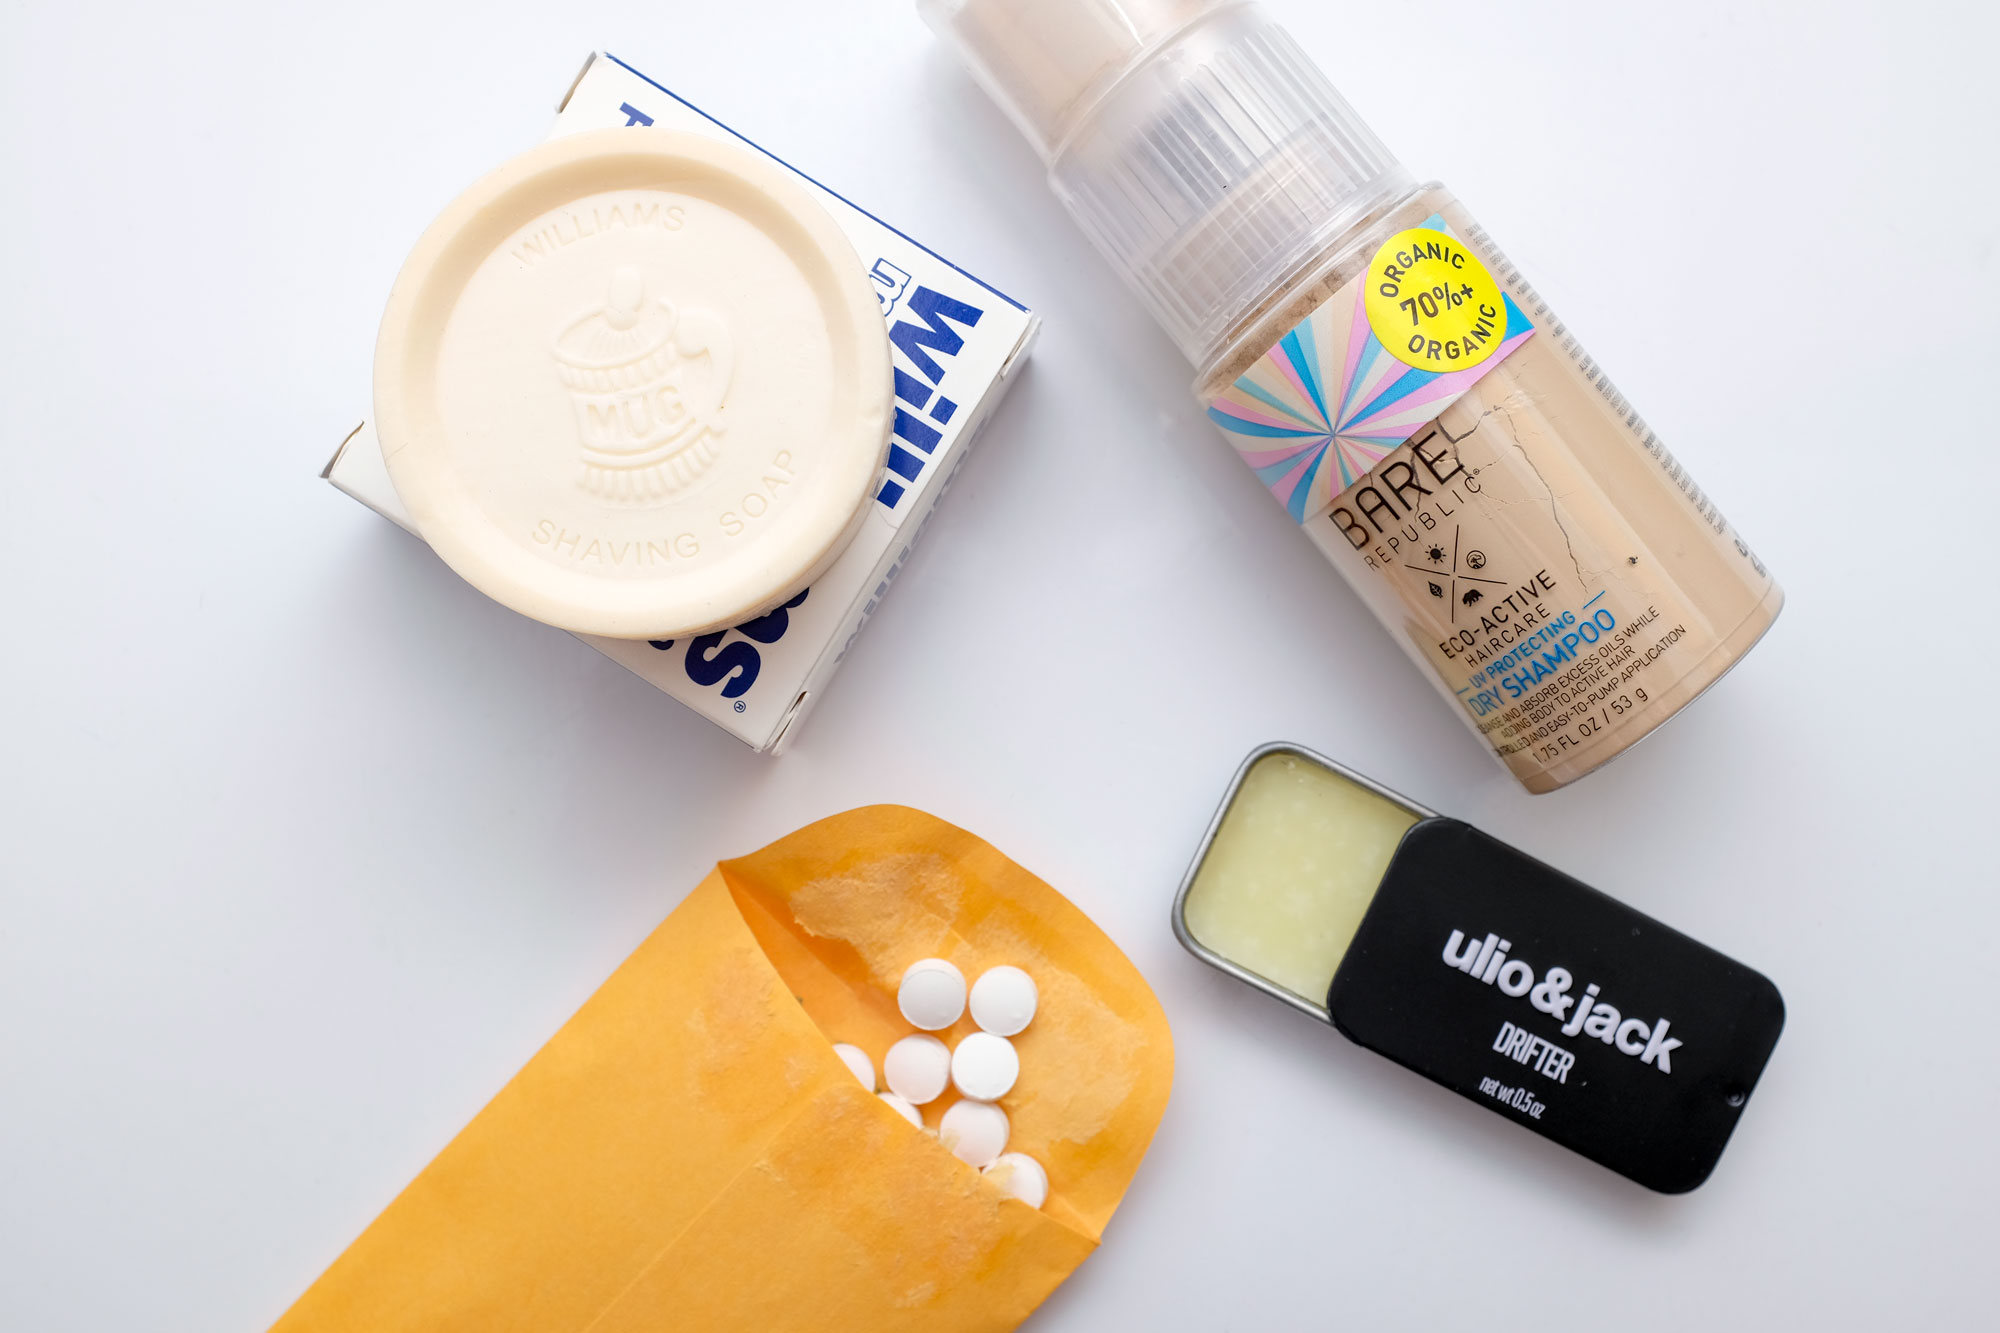 Flatlay with shave soap, powder dry shampoo, toothpaste tabs, and solid cologne